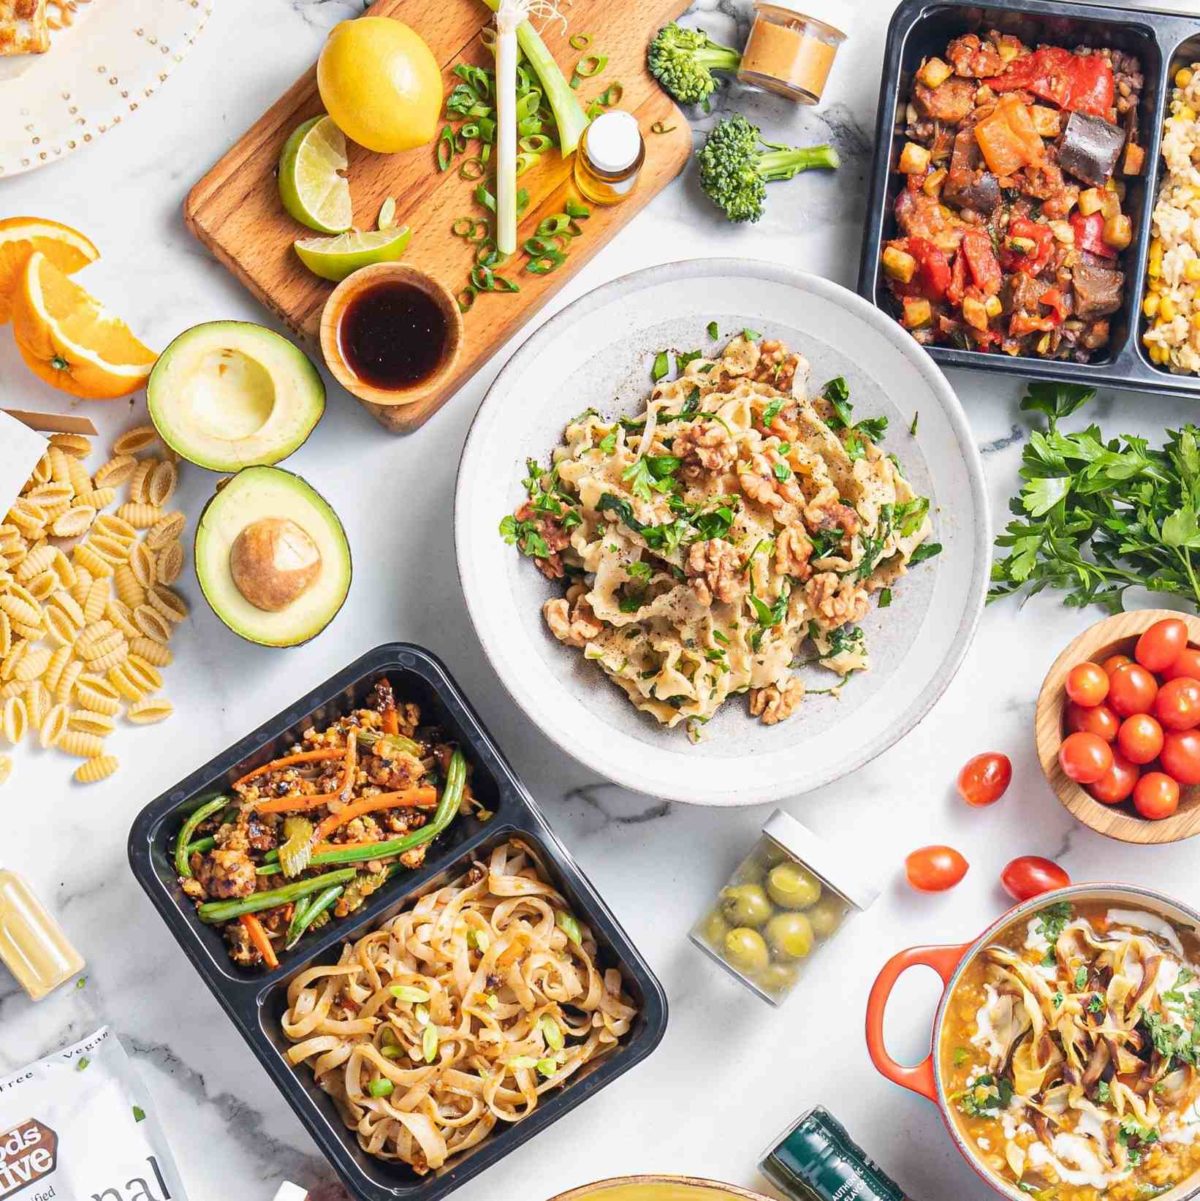 10 Best Meal Kit Delivery Brands - Must Read This Before Buying